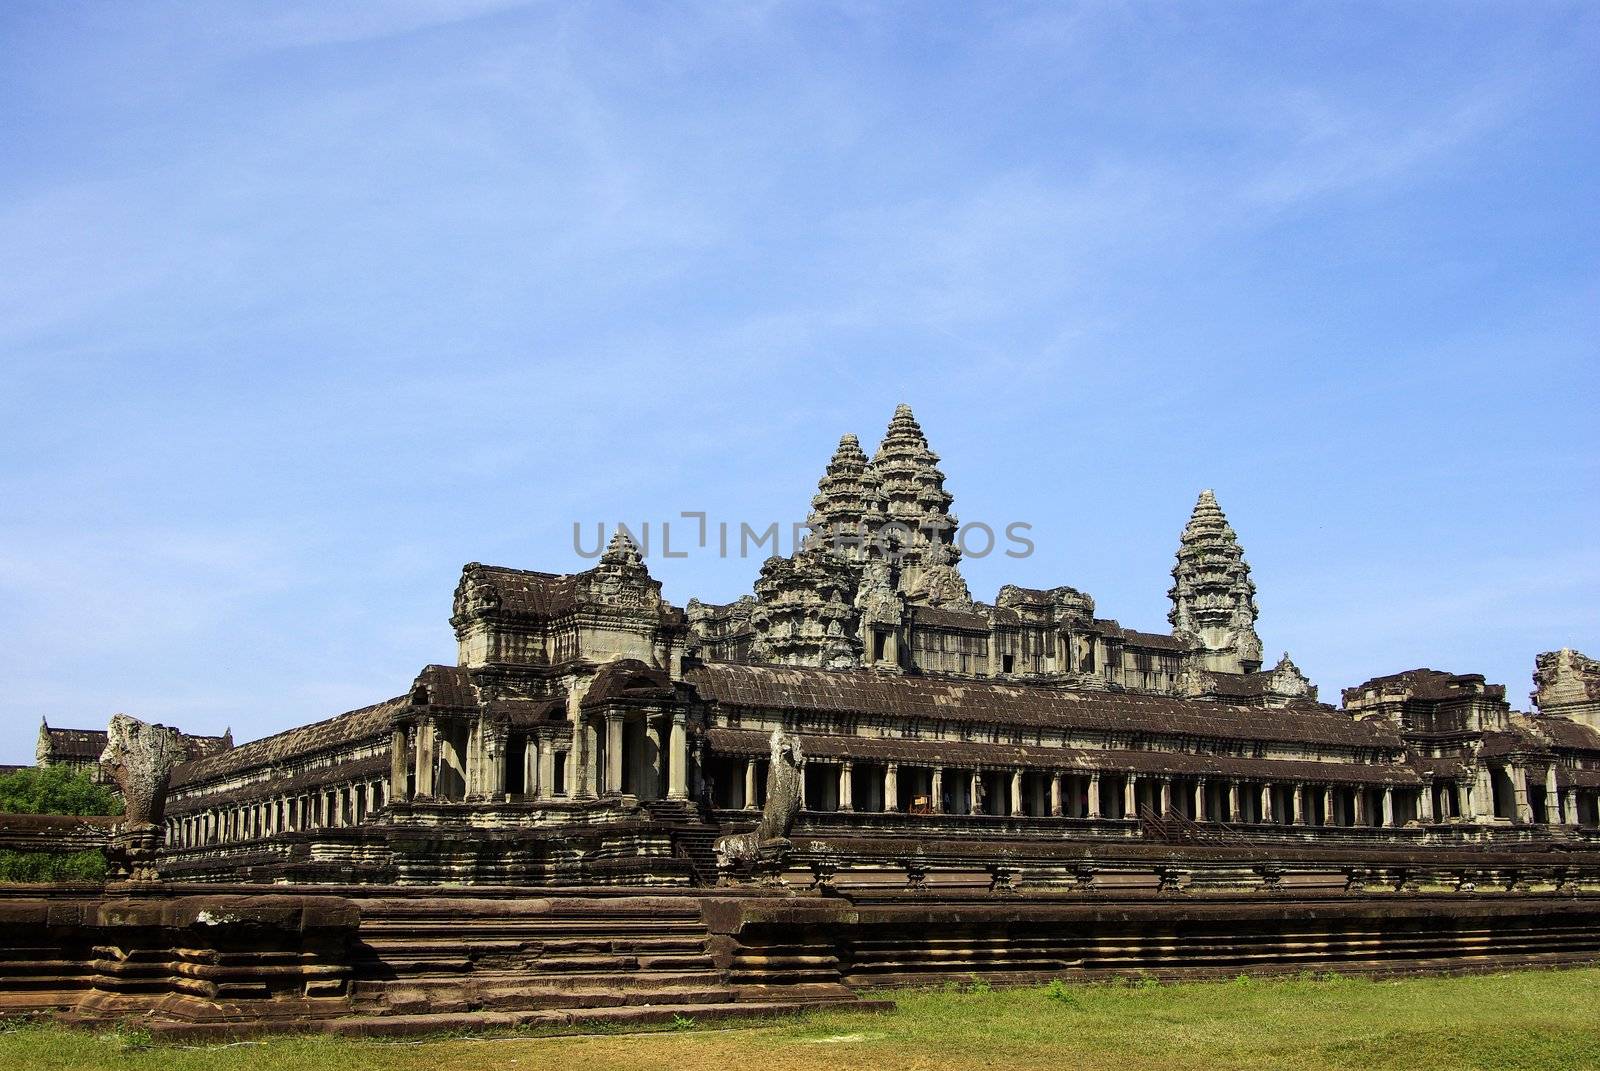 Wide corner view of Angkor Wat temple in Angkor by shkyo30